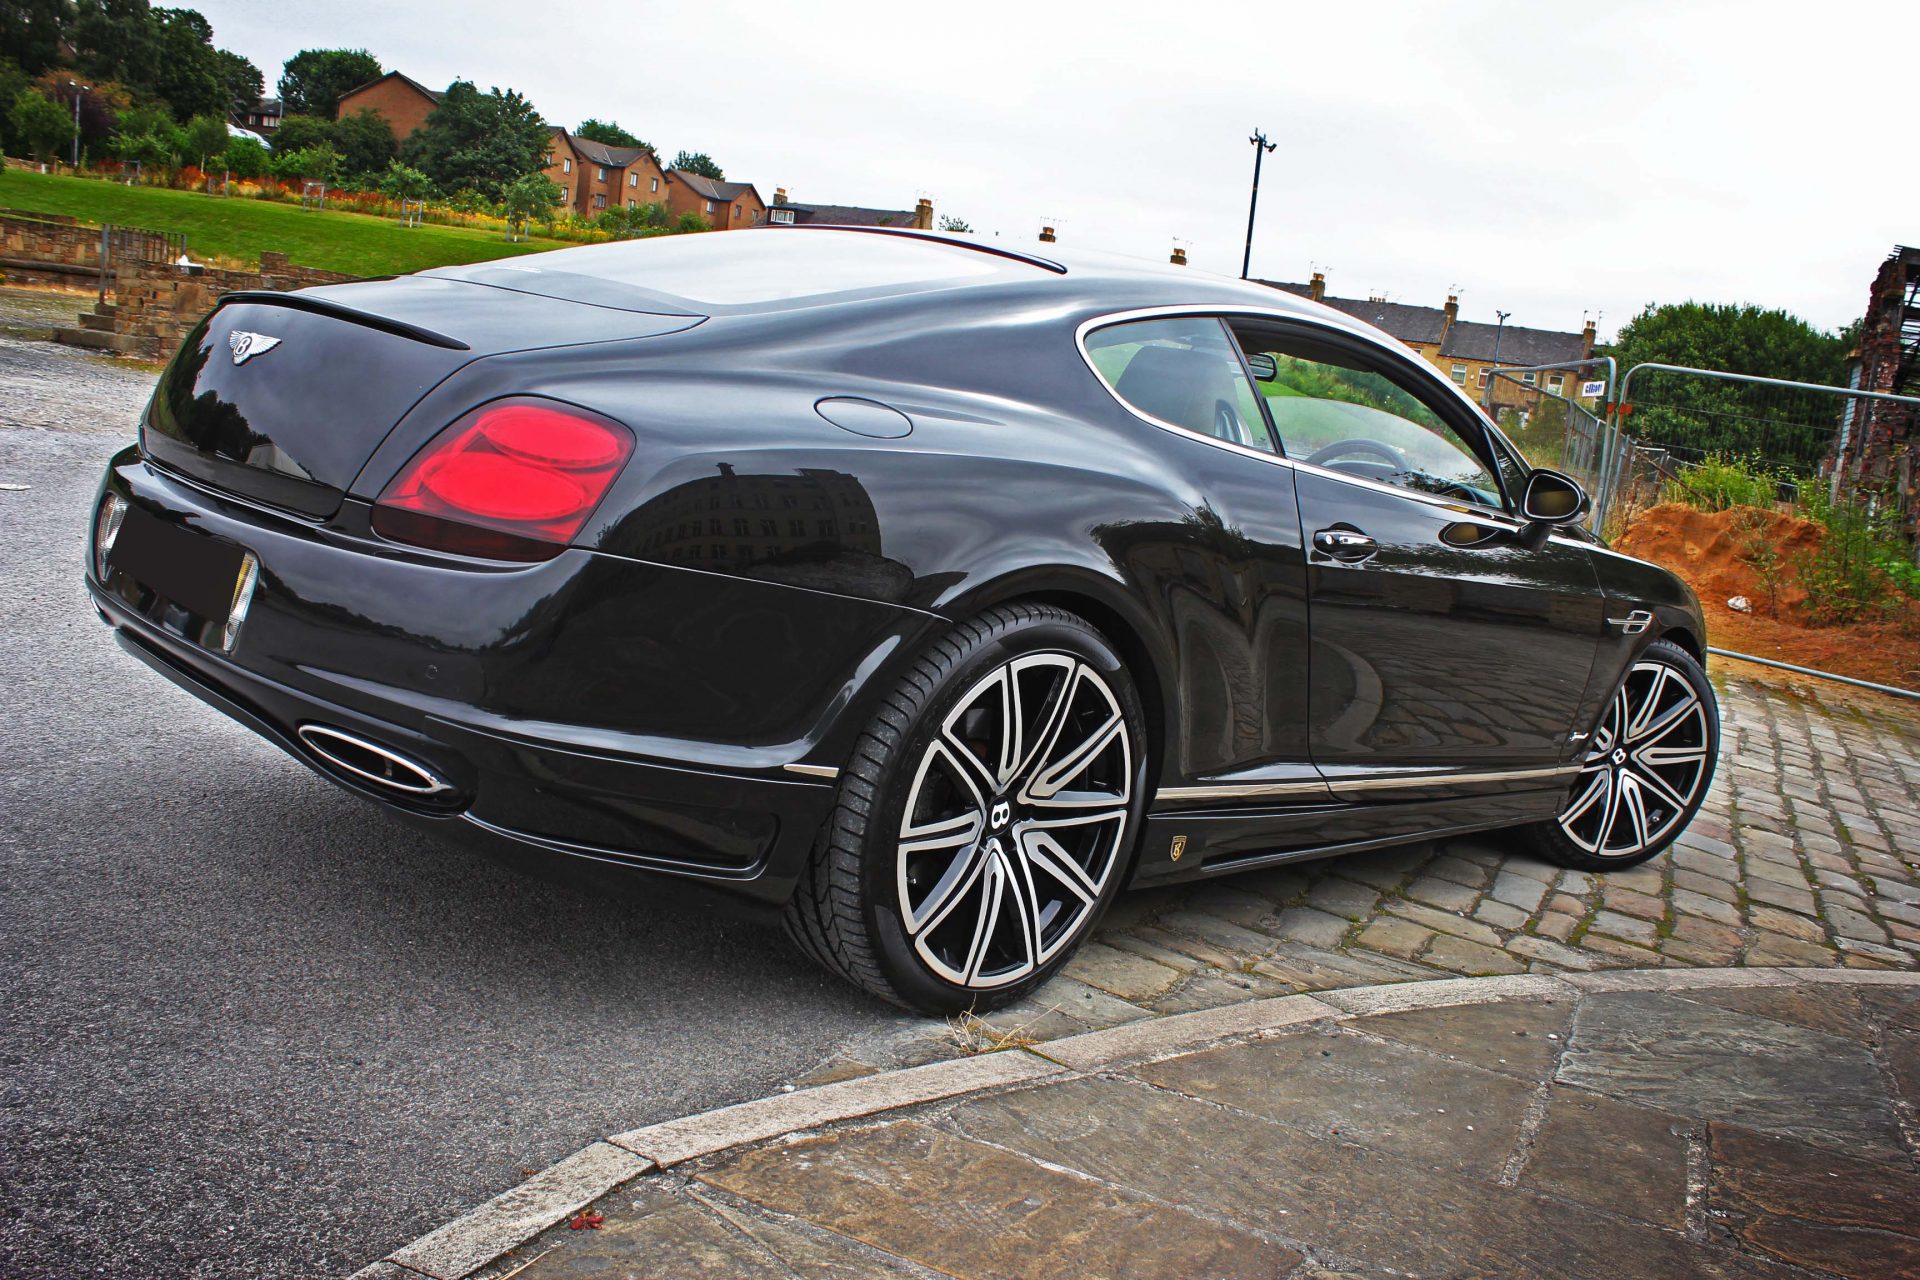 Check our price and buy Barugzai body kit for Bentley Continental GT!